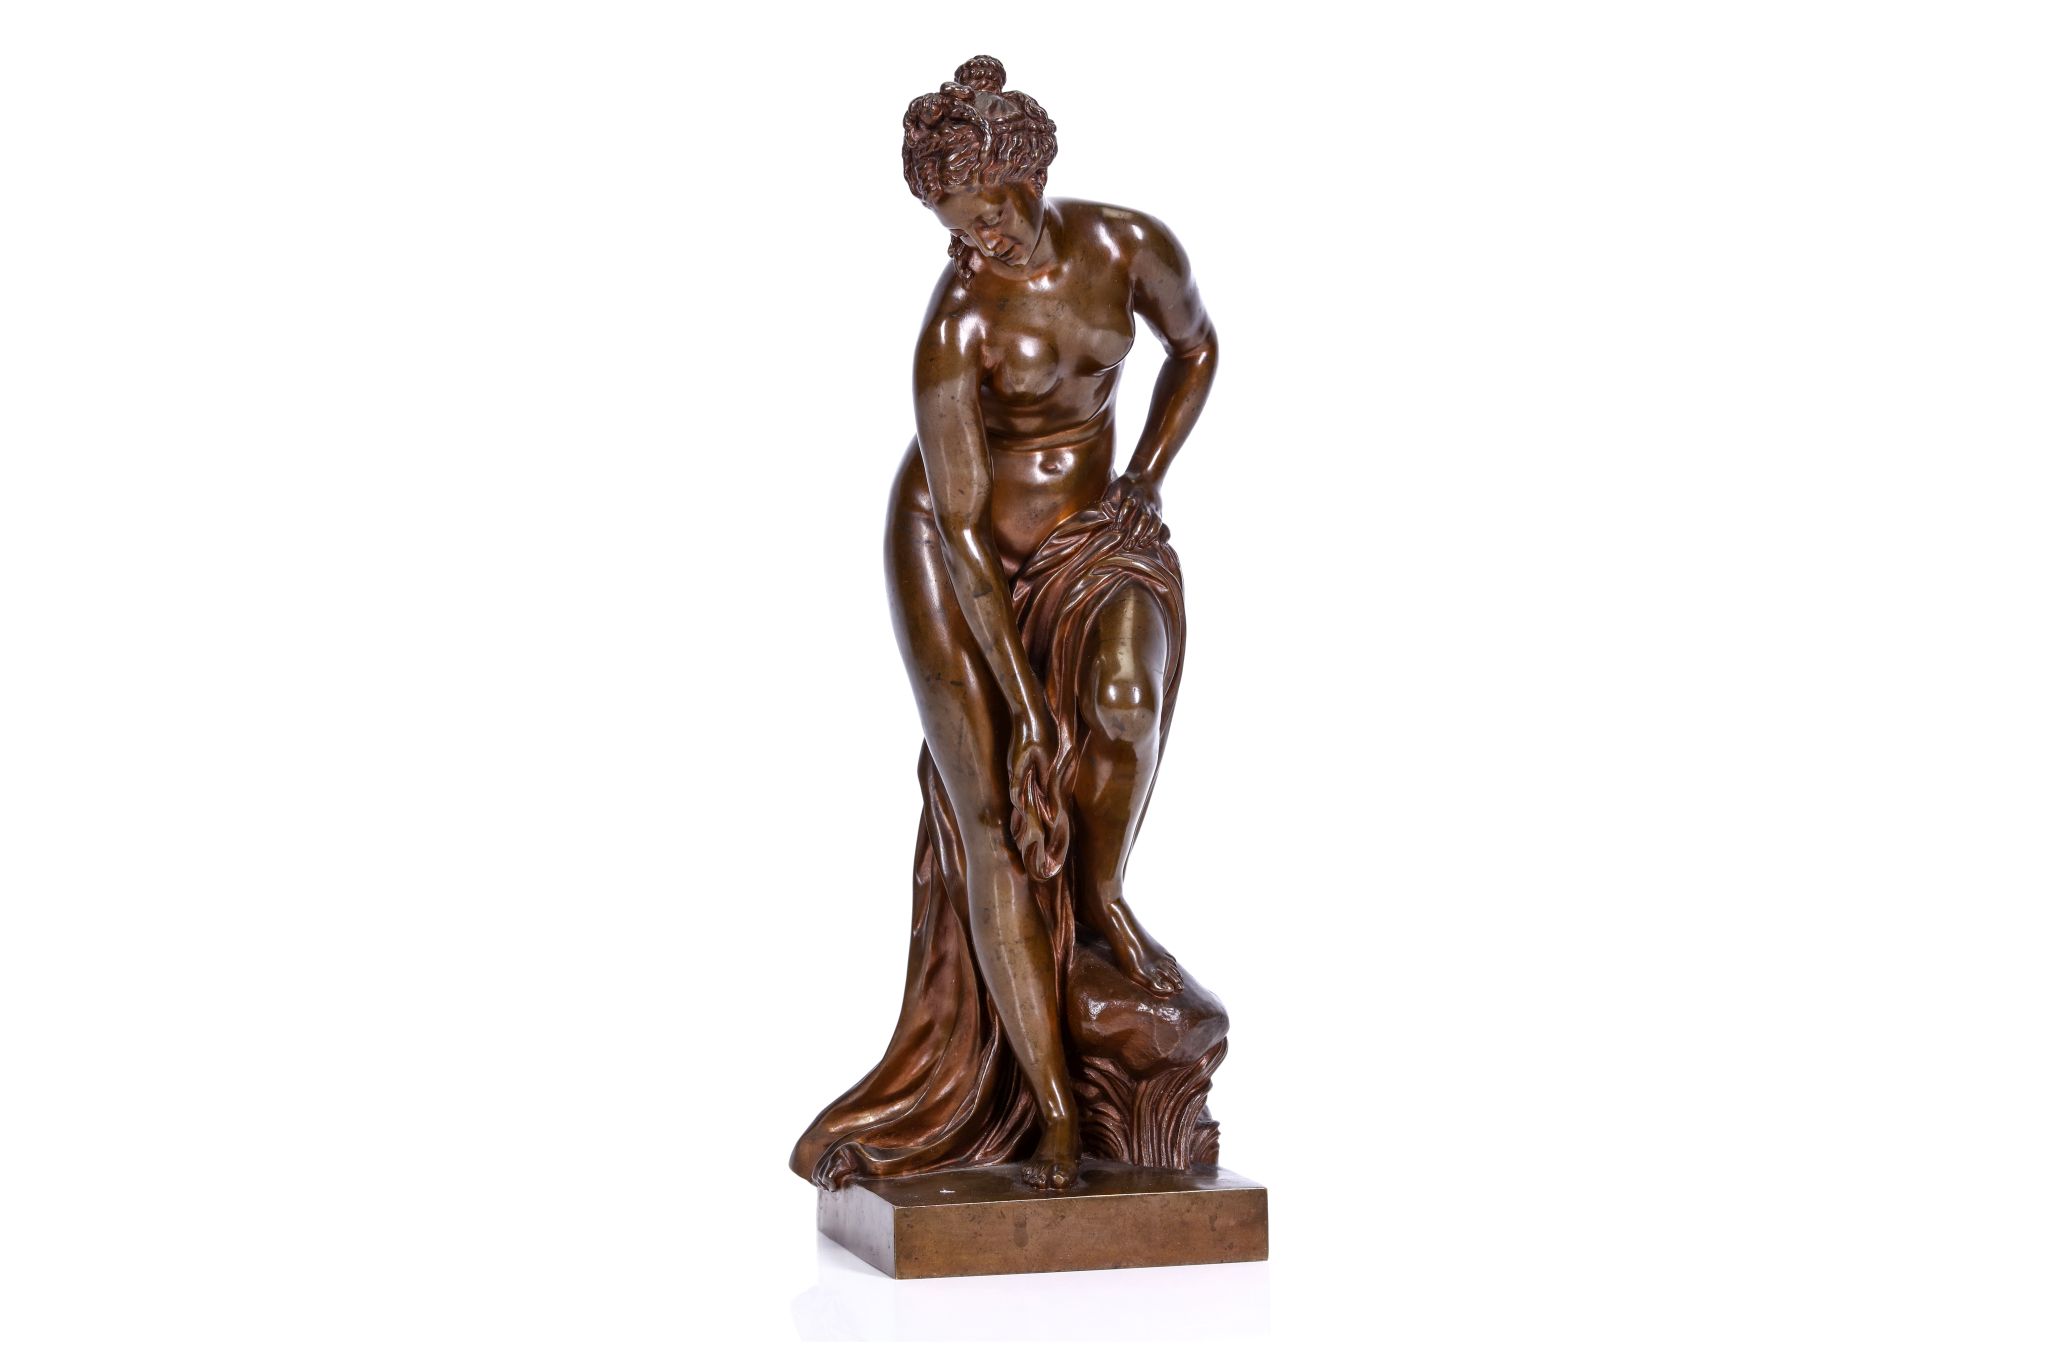 AFTER CHRISTOPHE GABRIEL ALLEGRAIN (FRENCH, 1710-1795): A LATE 19TH CENTURY FRENCH BRONZE FIGURE